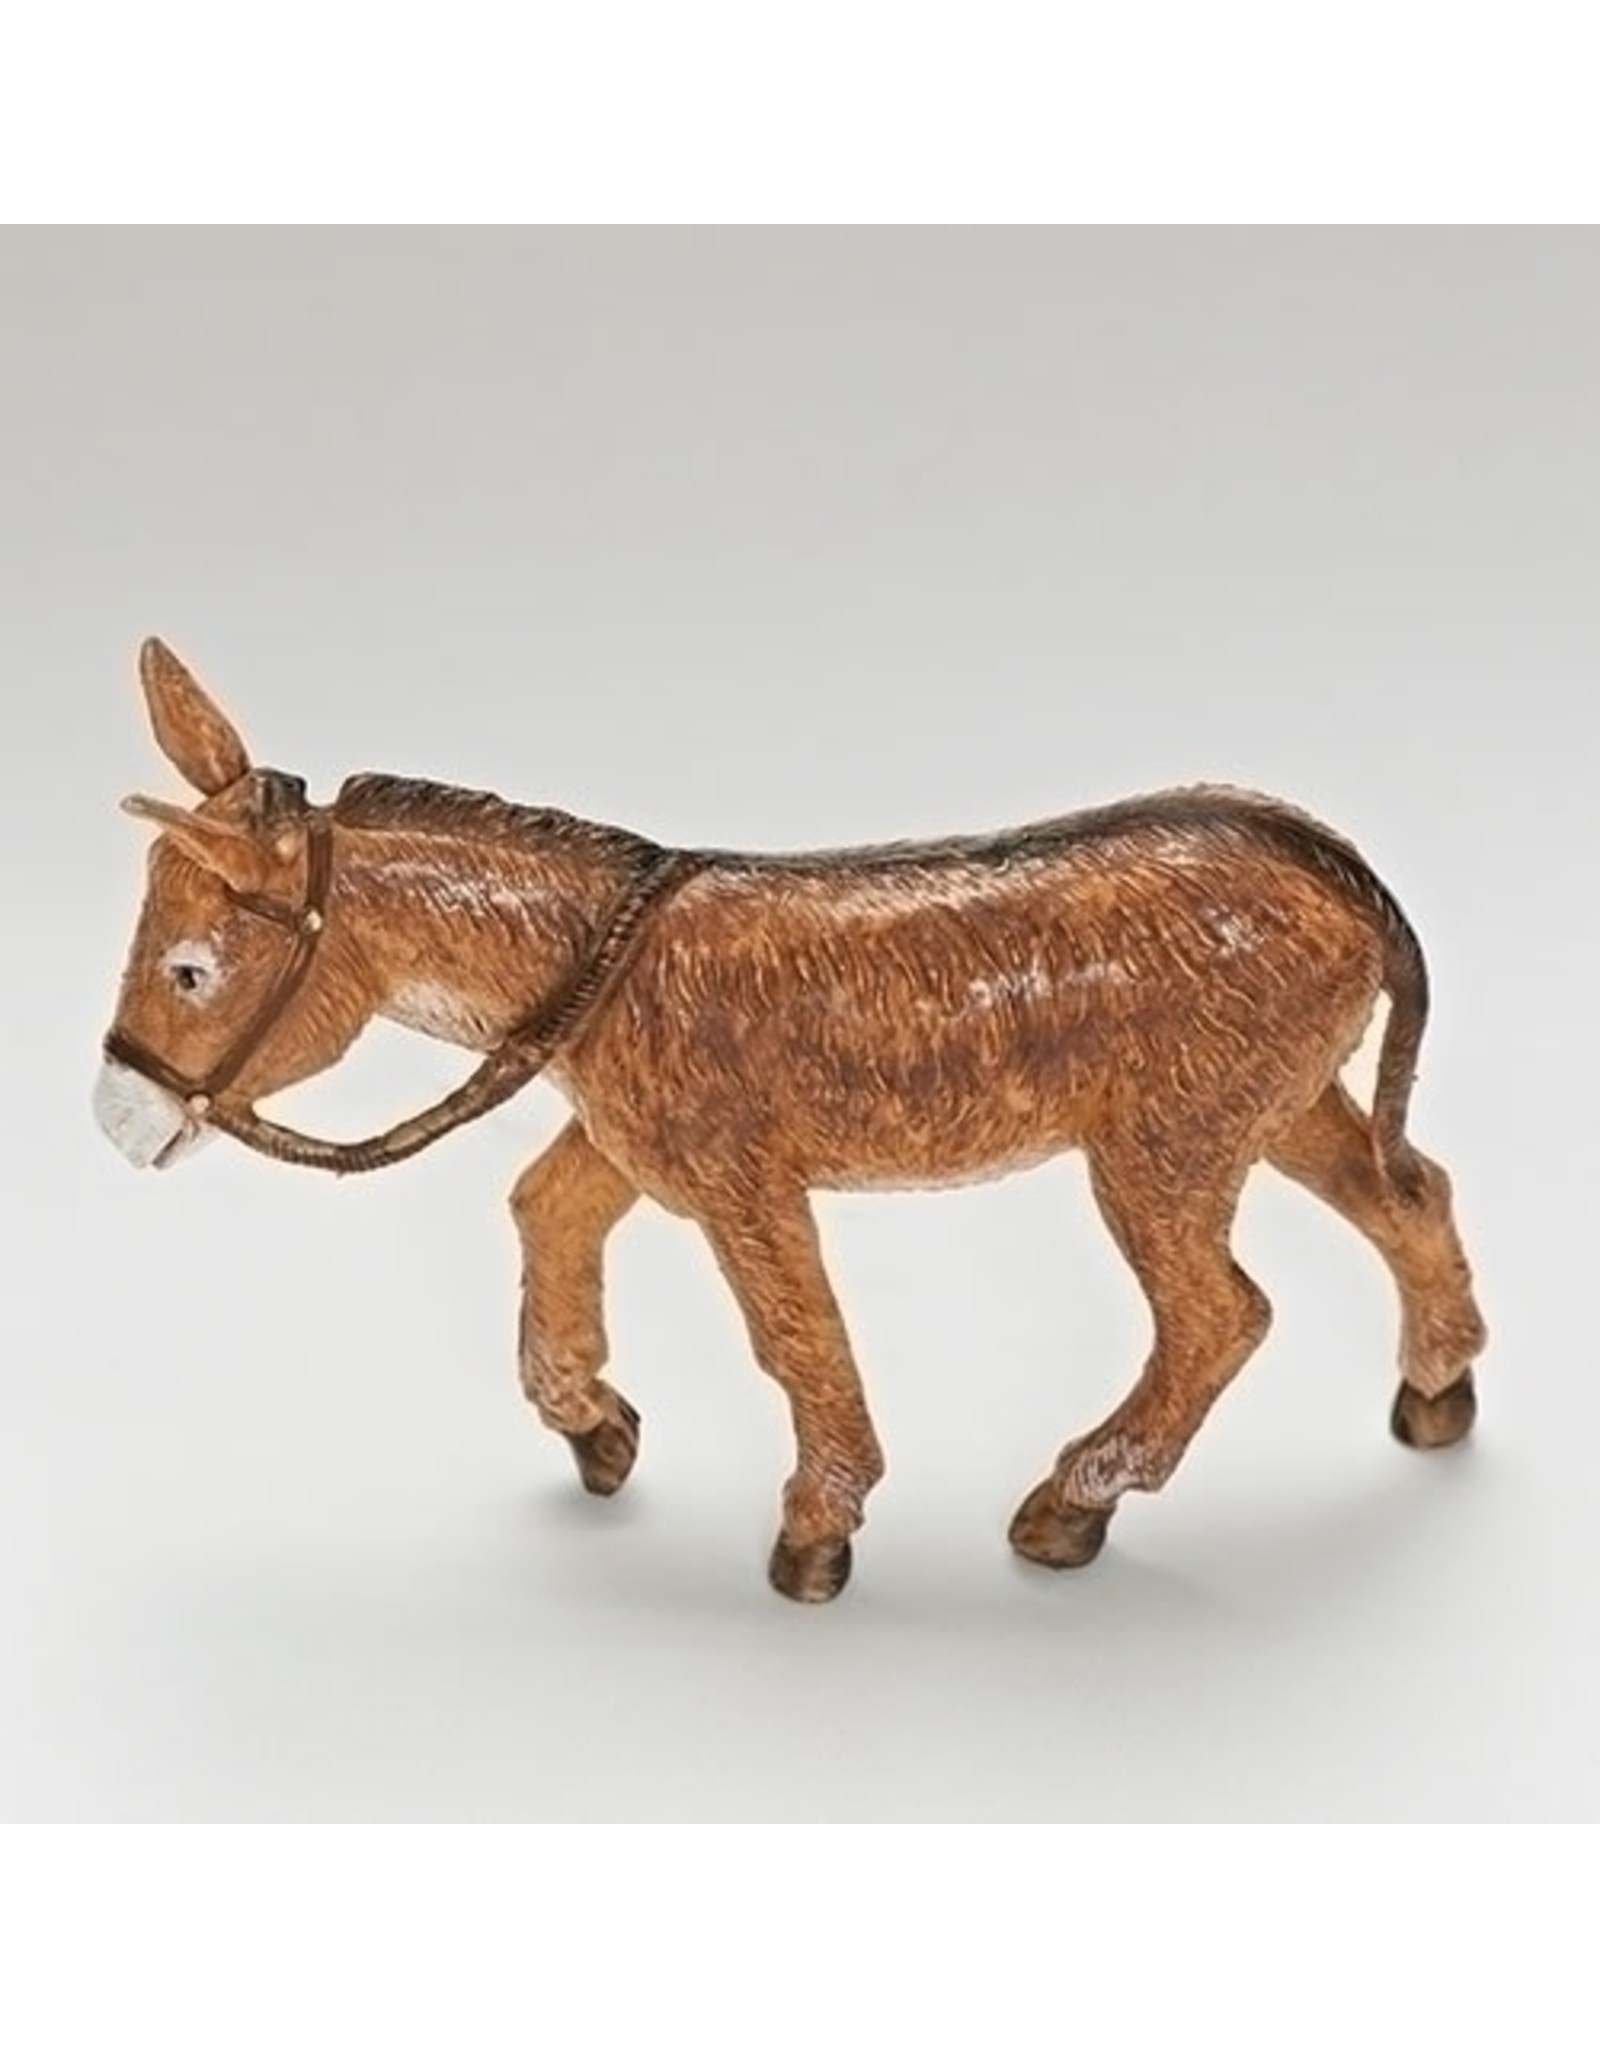 Fontanini - Standing Donkey with Cross Hair (5" Scale)